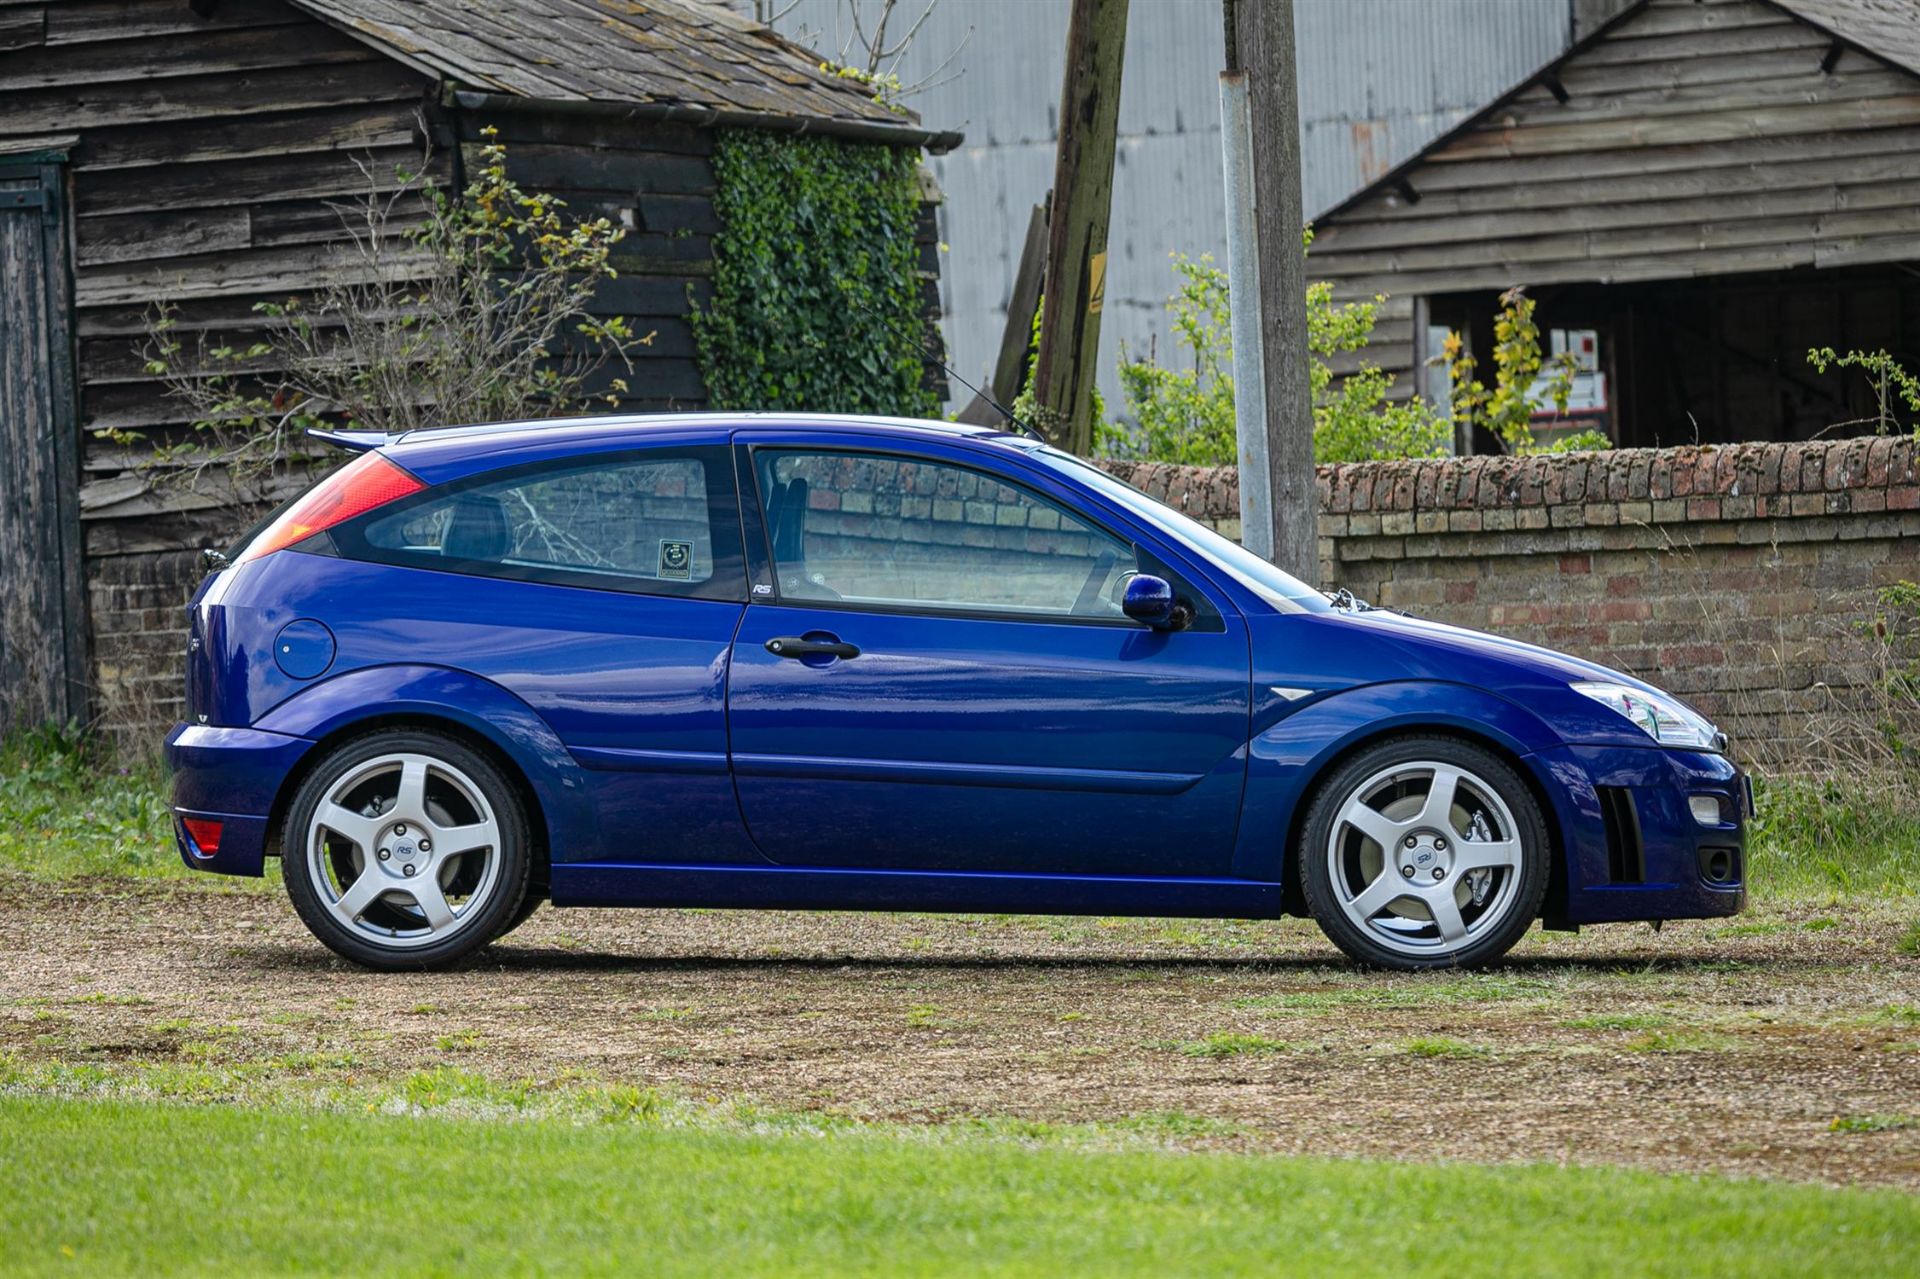 2003 Ford Focus RS Mk1 - 3265 Miles - Image 5 of 10